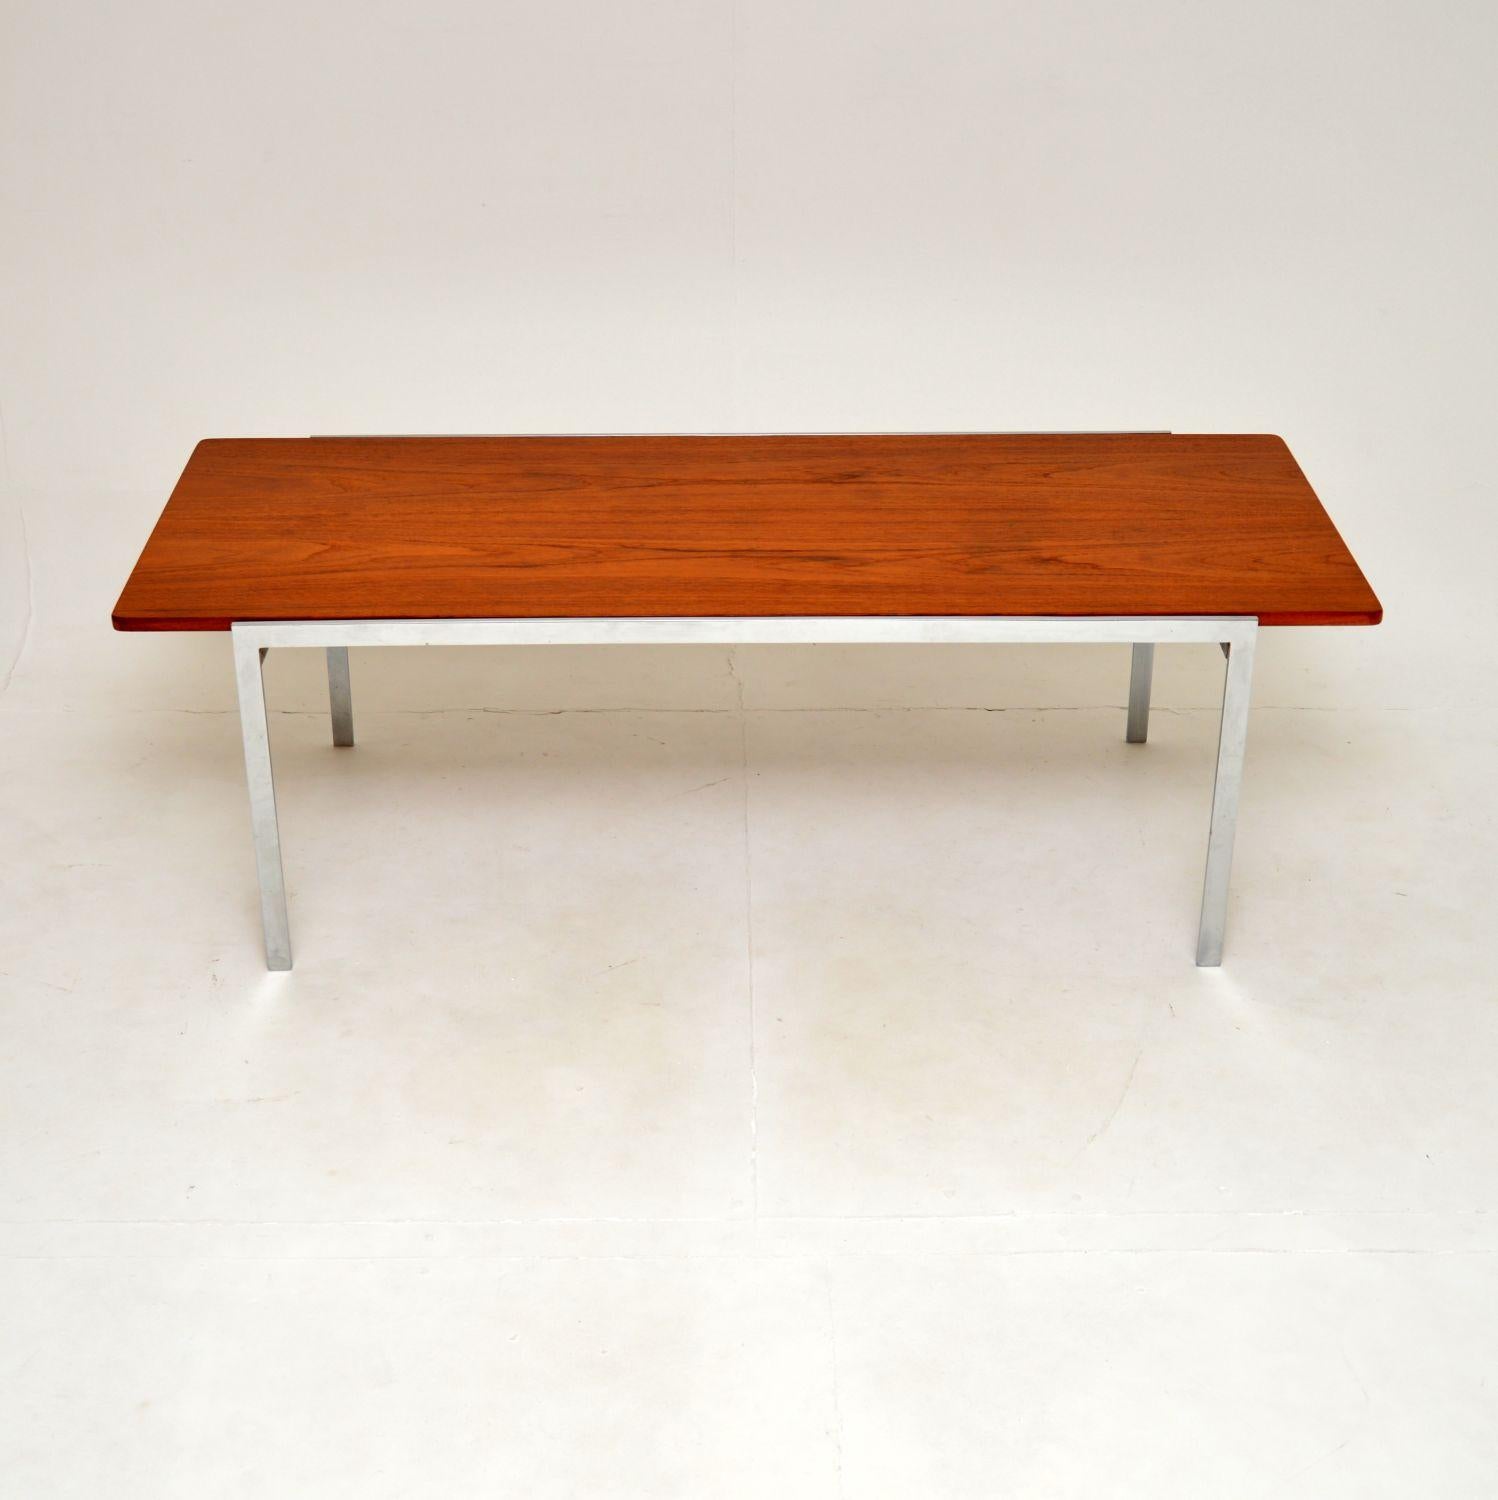 A stylish and very rare Danish vintage teak and chrome coffee table by Arne Jacobsen. This was made by Fritz Hansen, it dates from the 1960’s.

It is of superb quality, it is a large and impressive size. The teak top has stunning grain patterns and